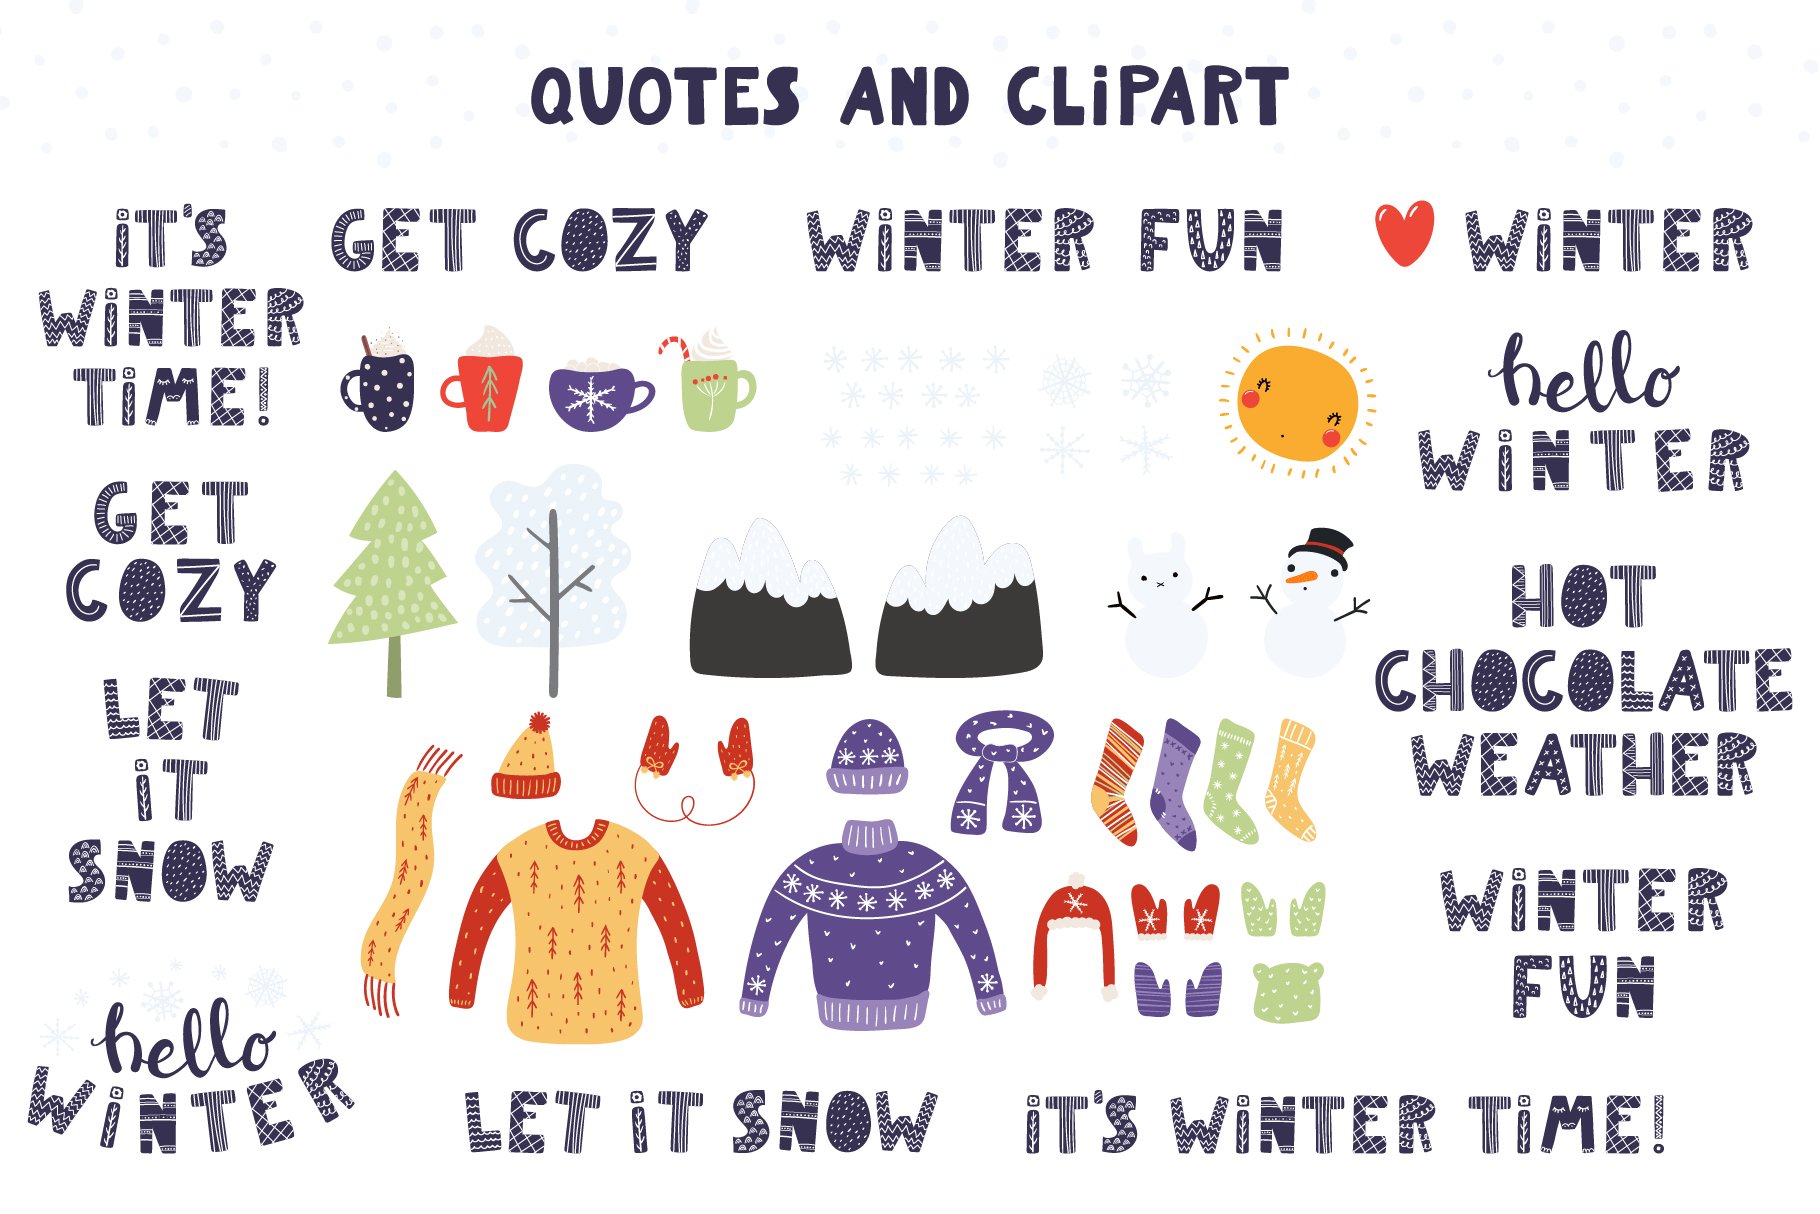 Winter quotes and illustrations.